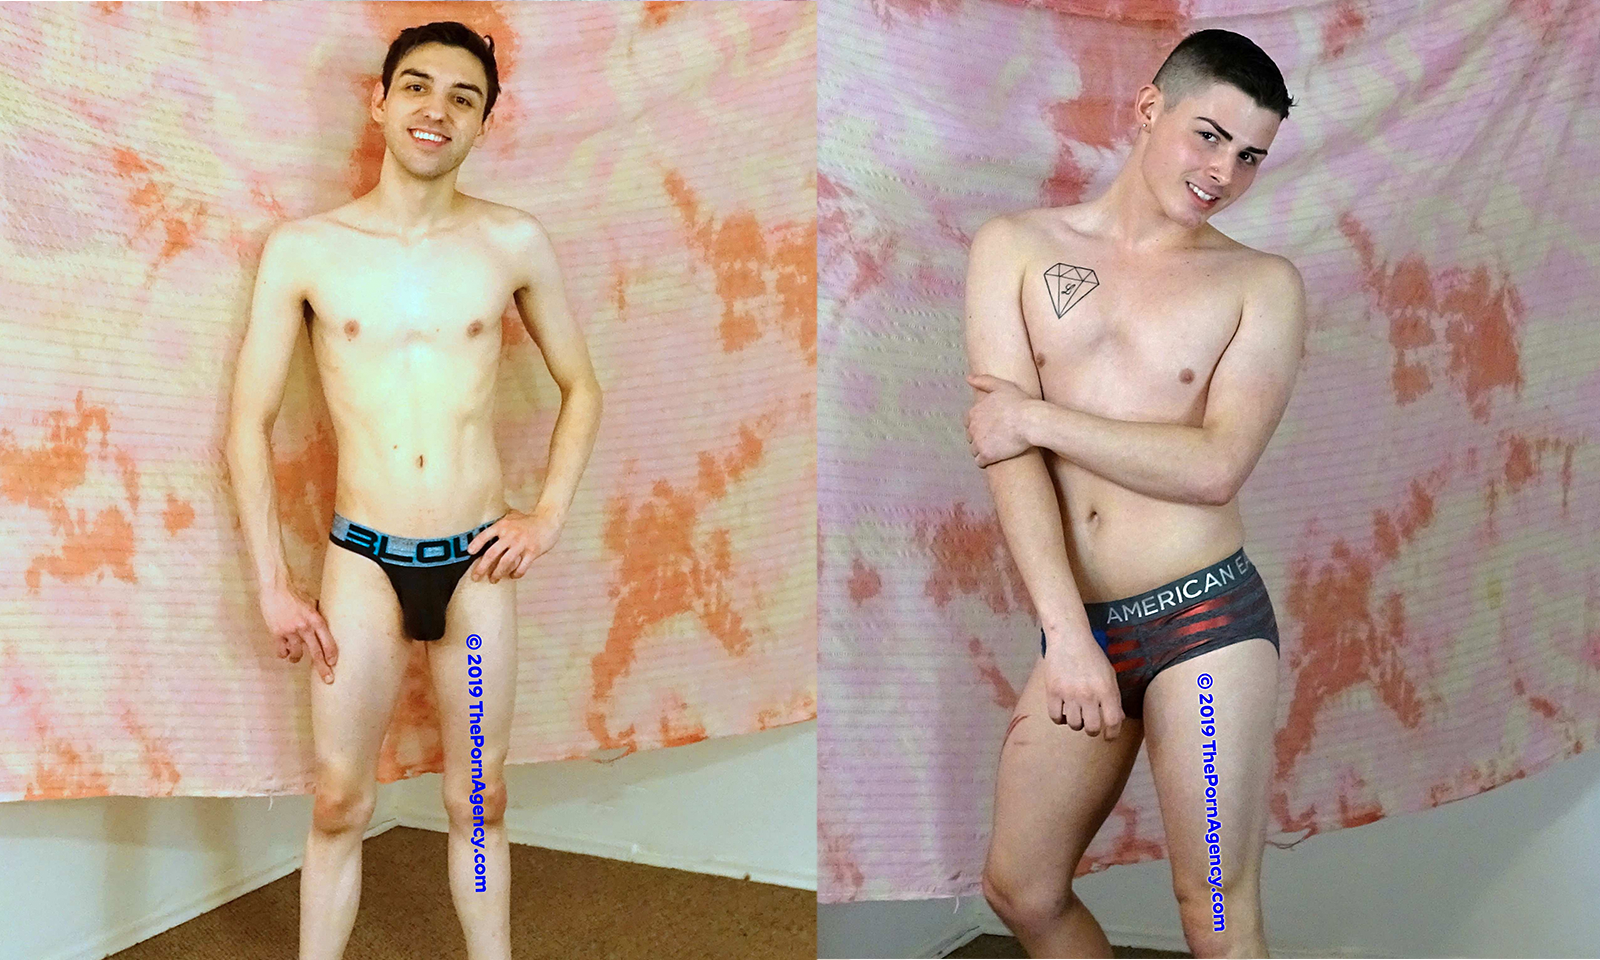 Two New Twink Performers Join ThePornAgency.com